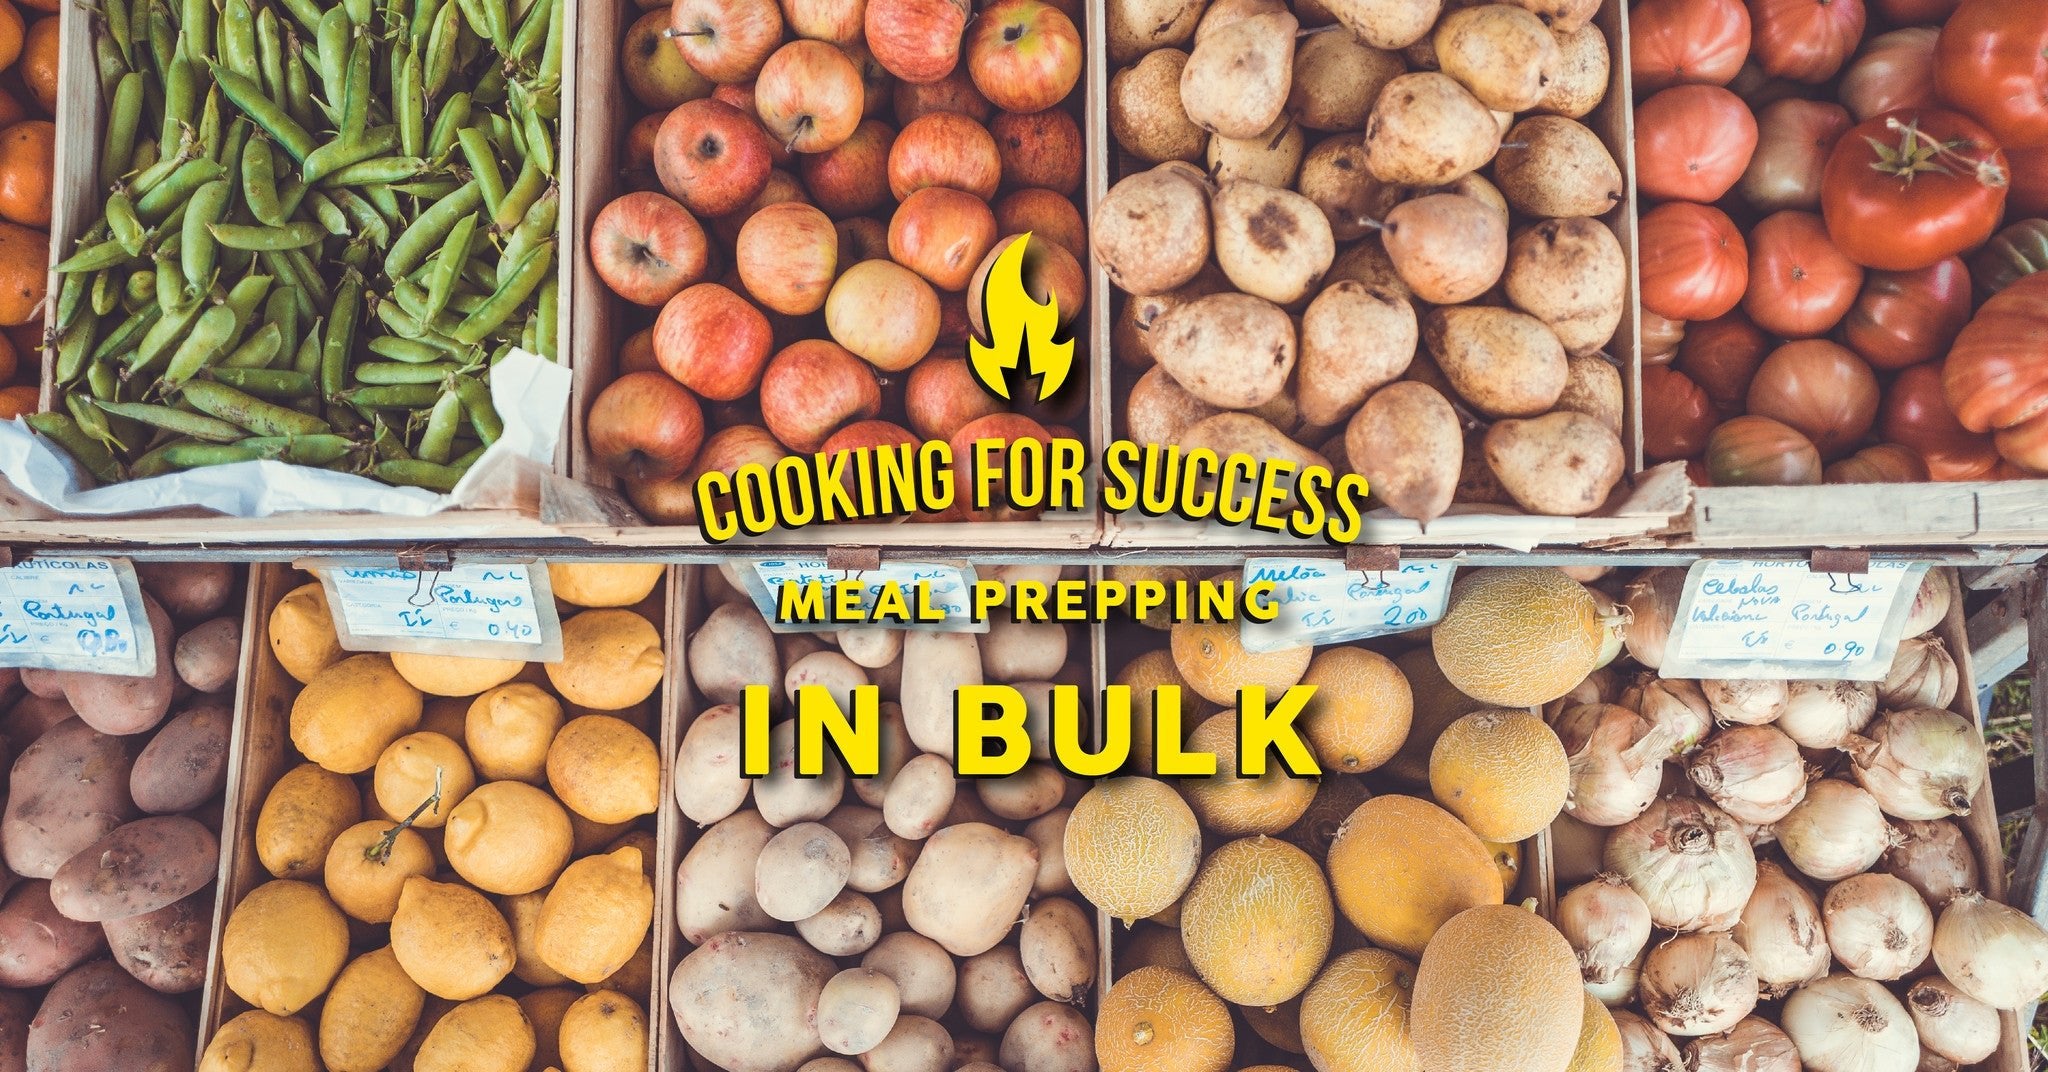 Meal prep professional: What's needed to cook in bulk